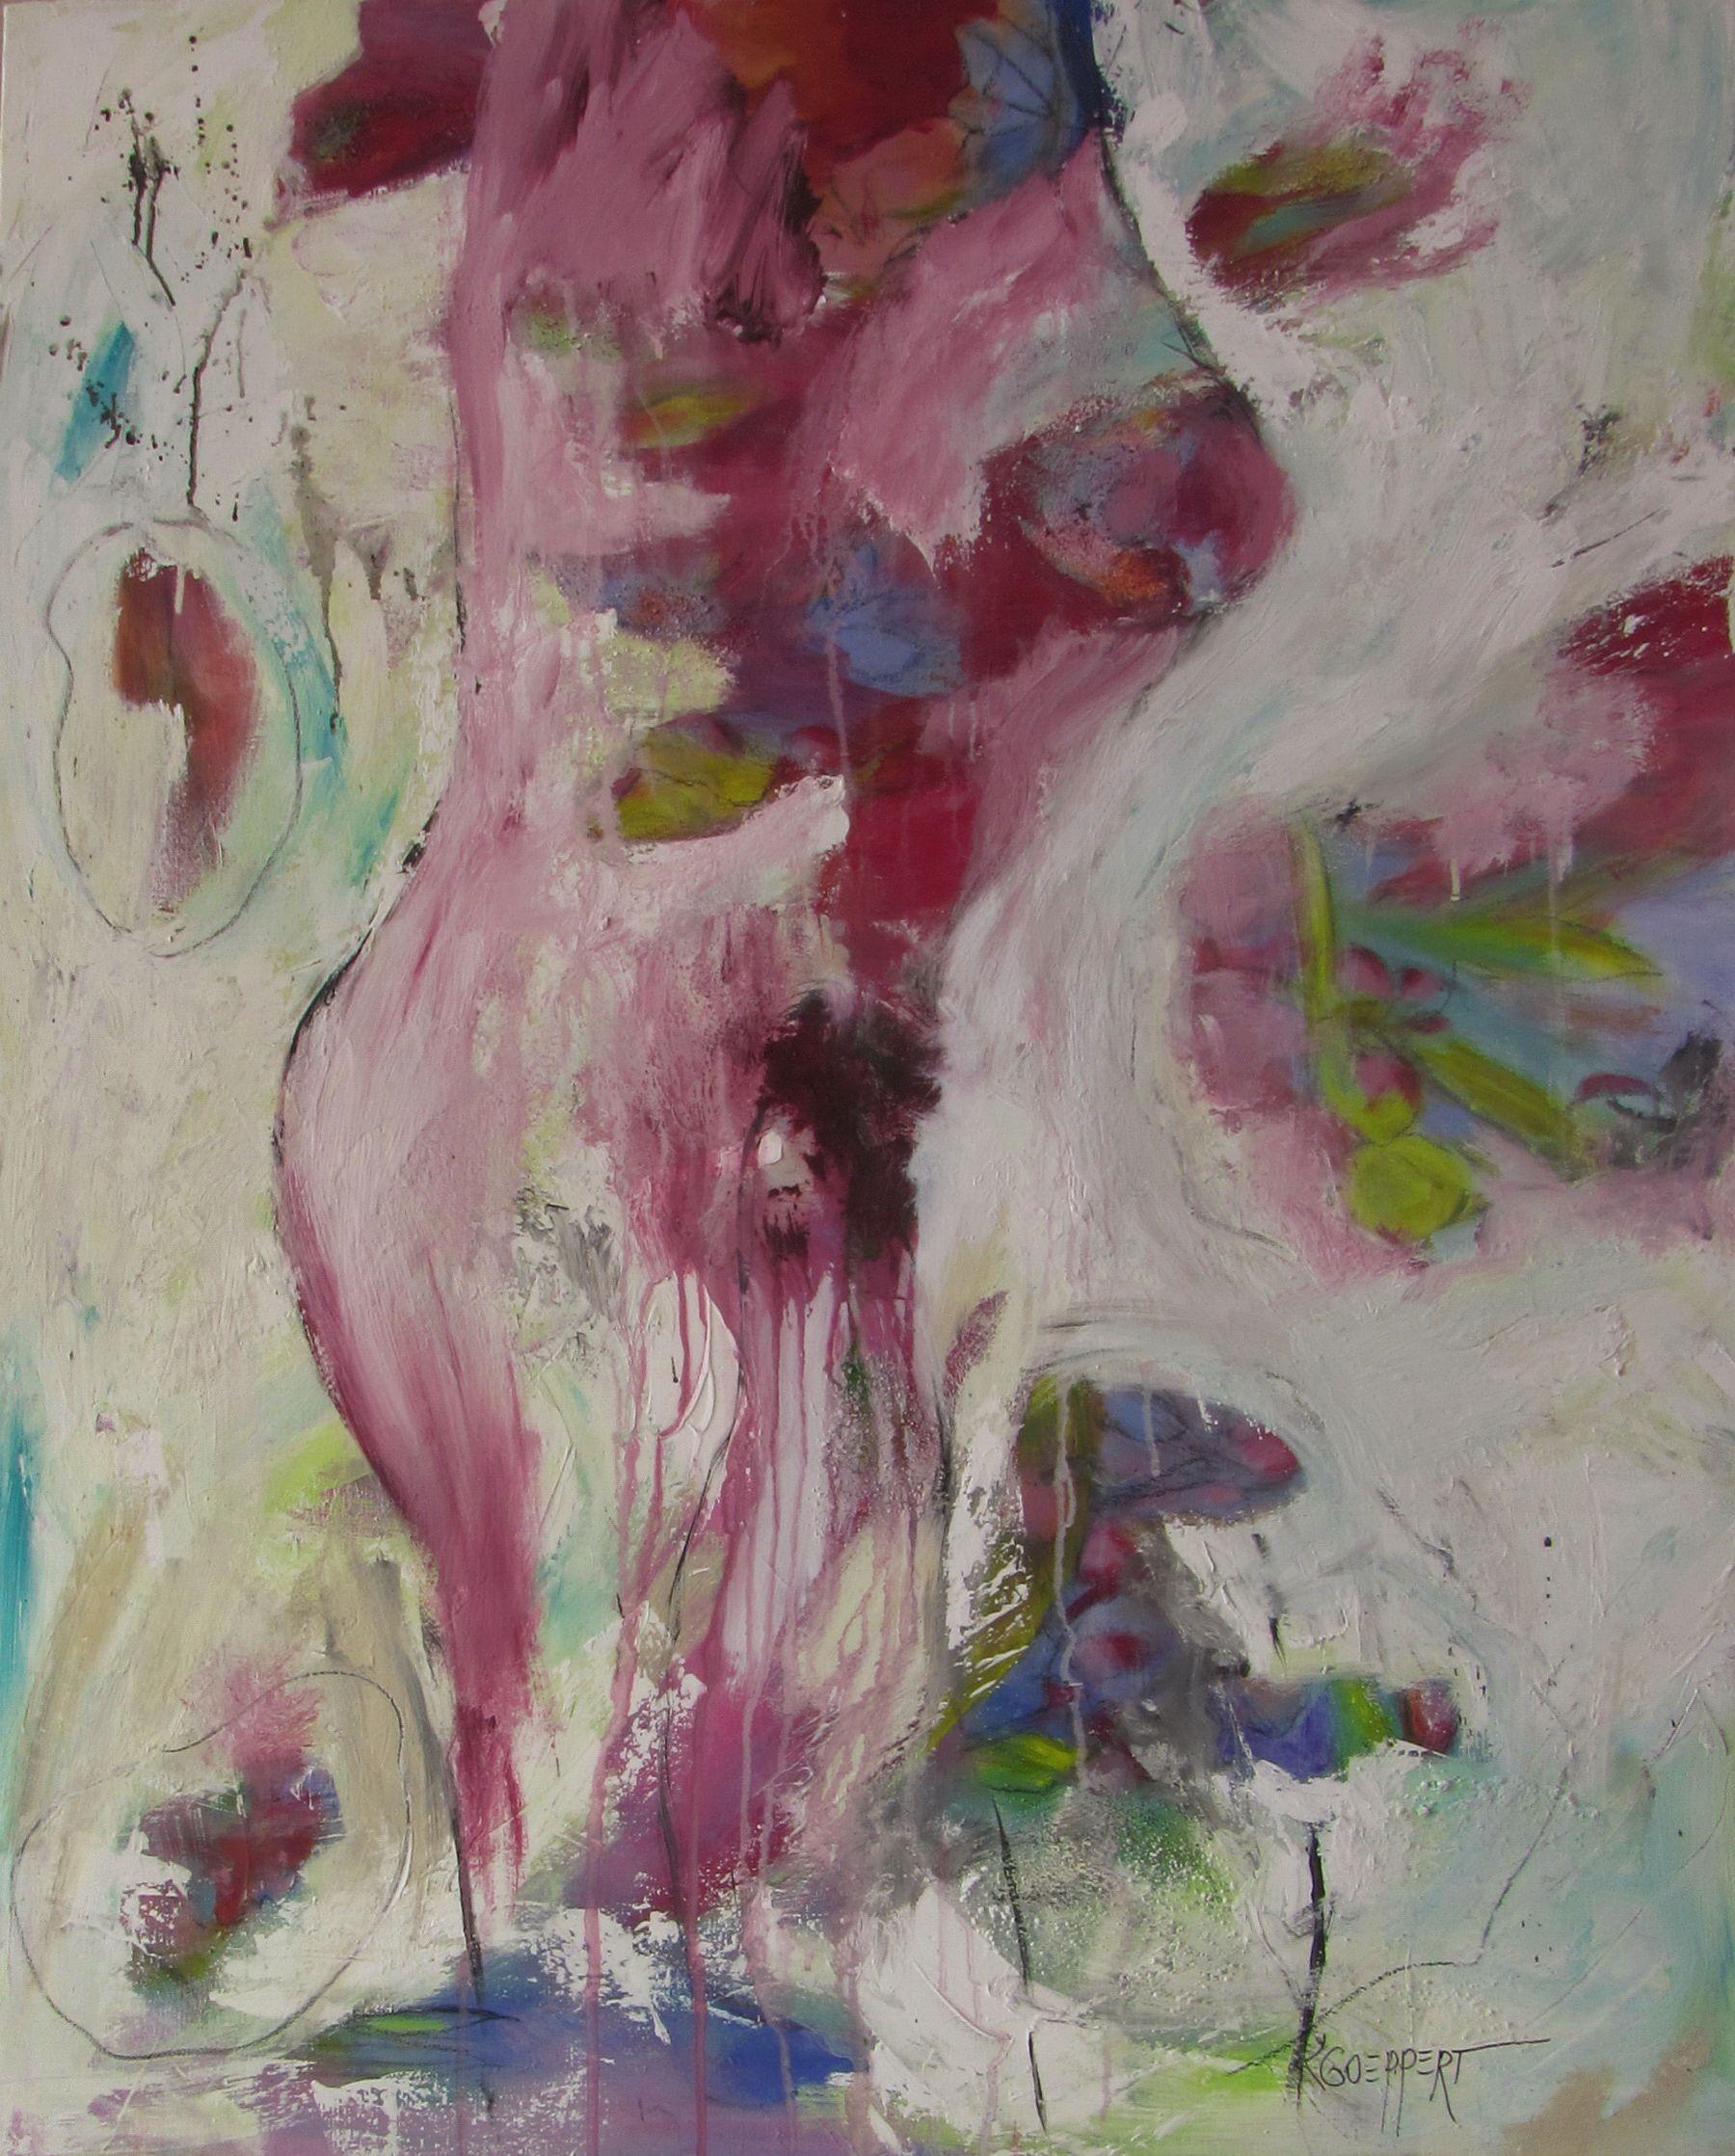 Karin Goeppert Abstract Painting - Mr Miller dreams of his Mistress, Painting, Acrylic on Canvas